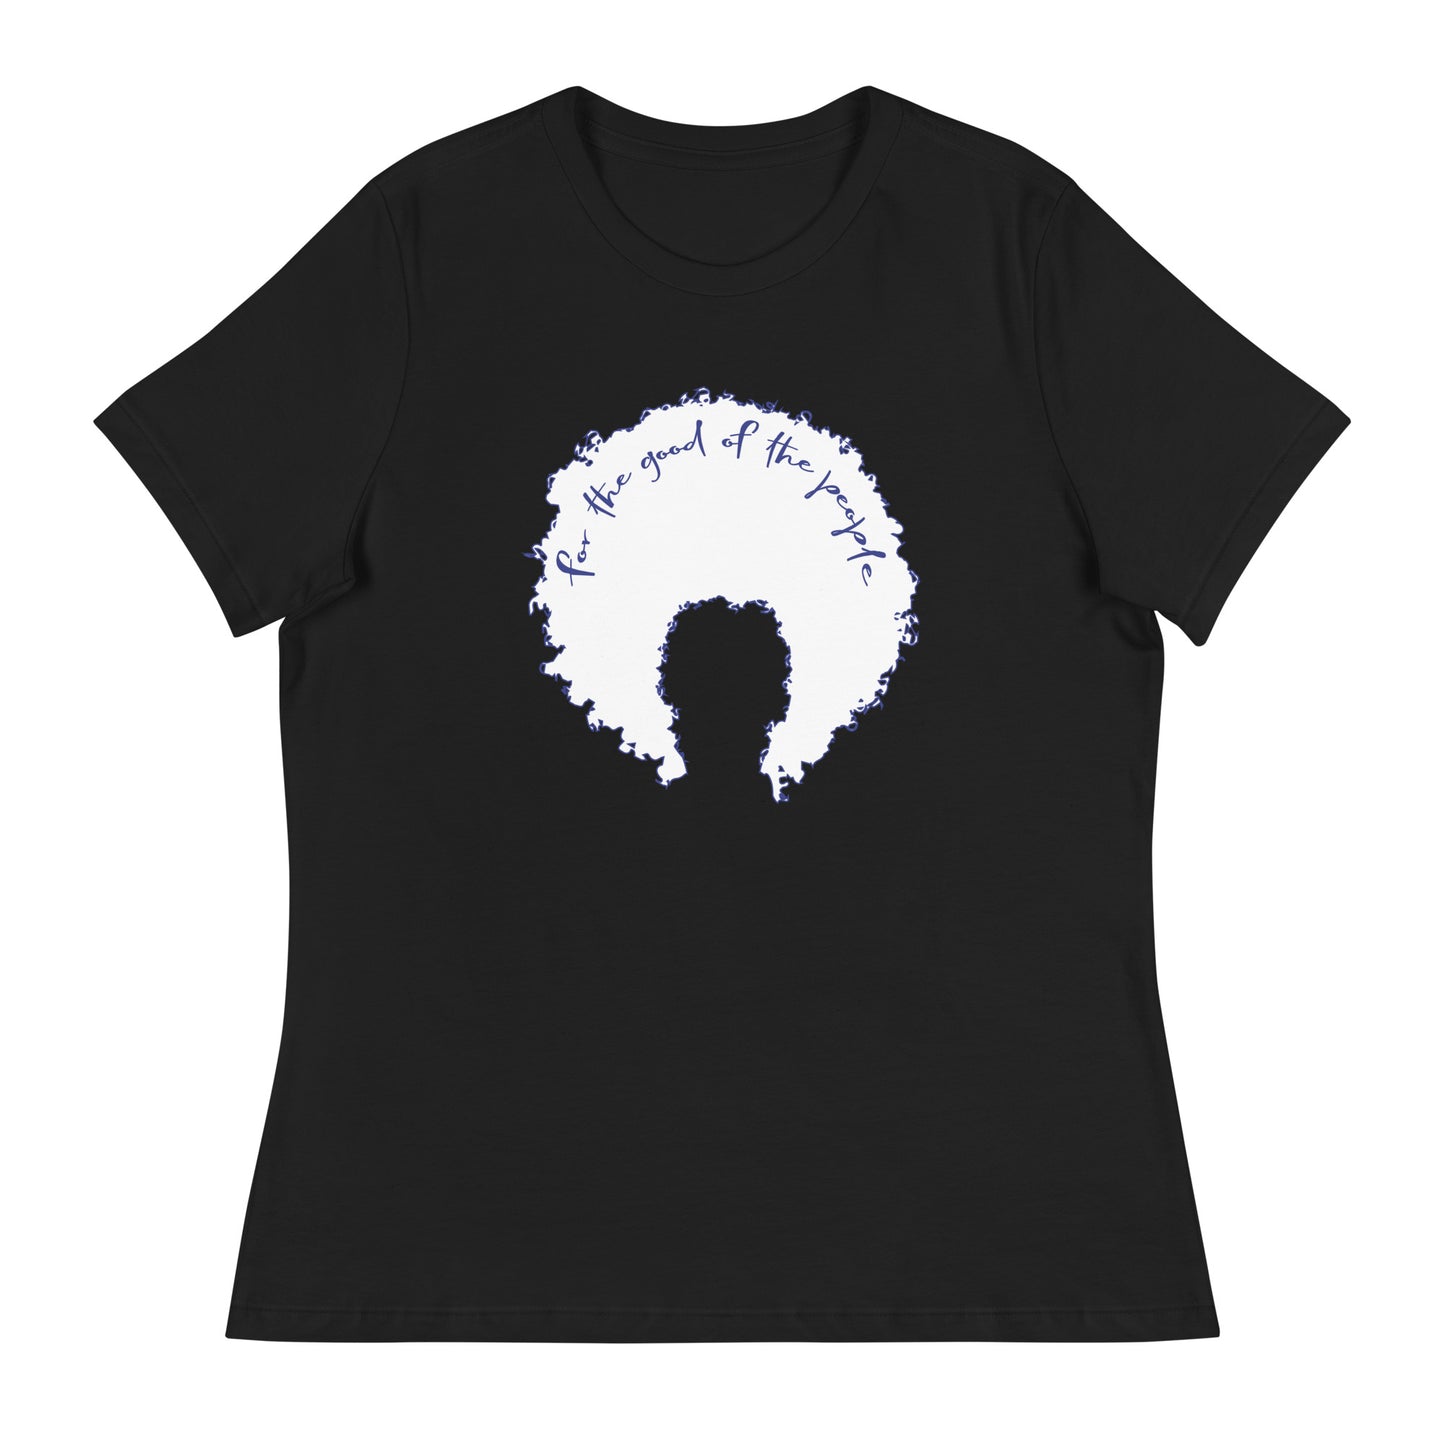 Black women's tee with white afro graphic trimmed in blue with for the good of the people in blue on the inside top of the afro.